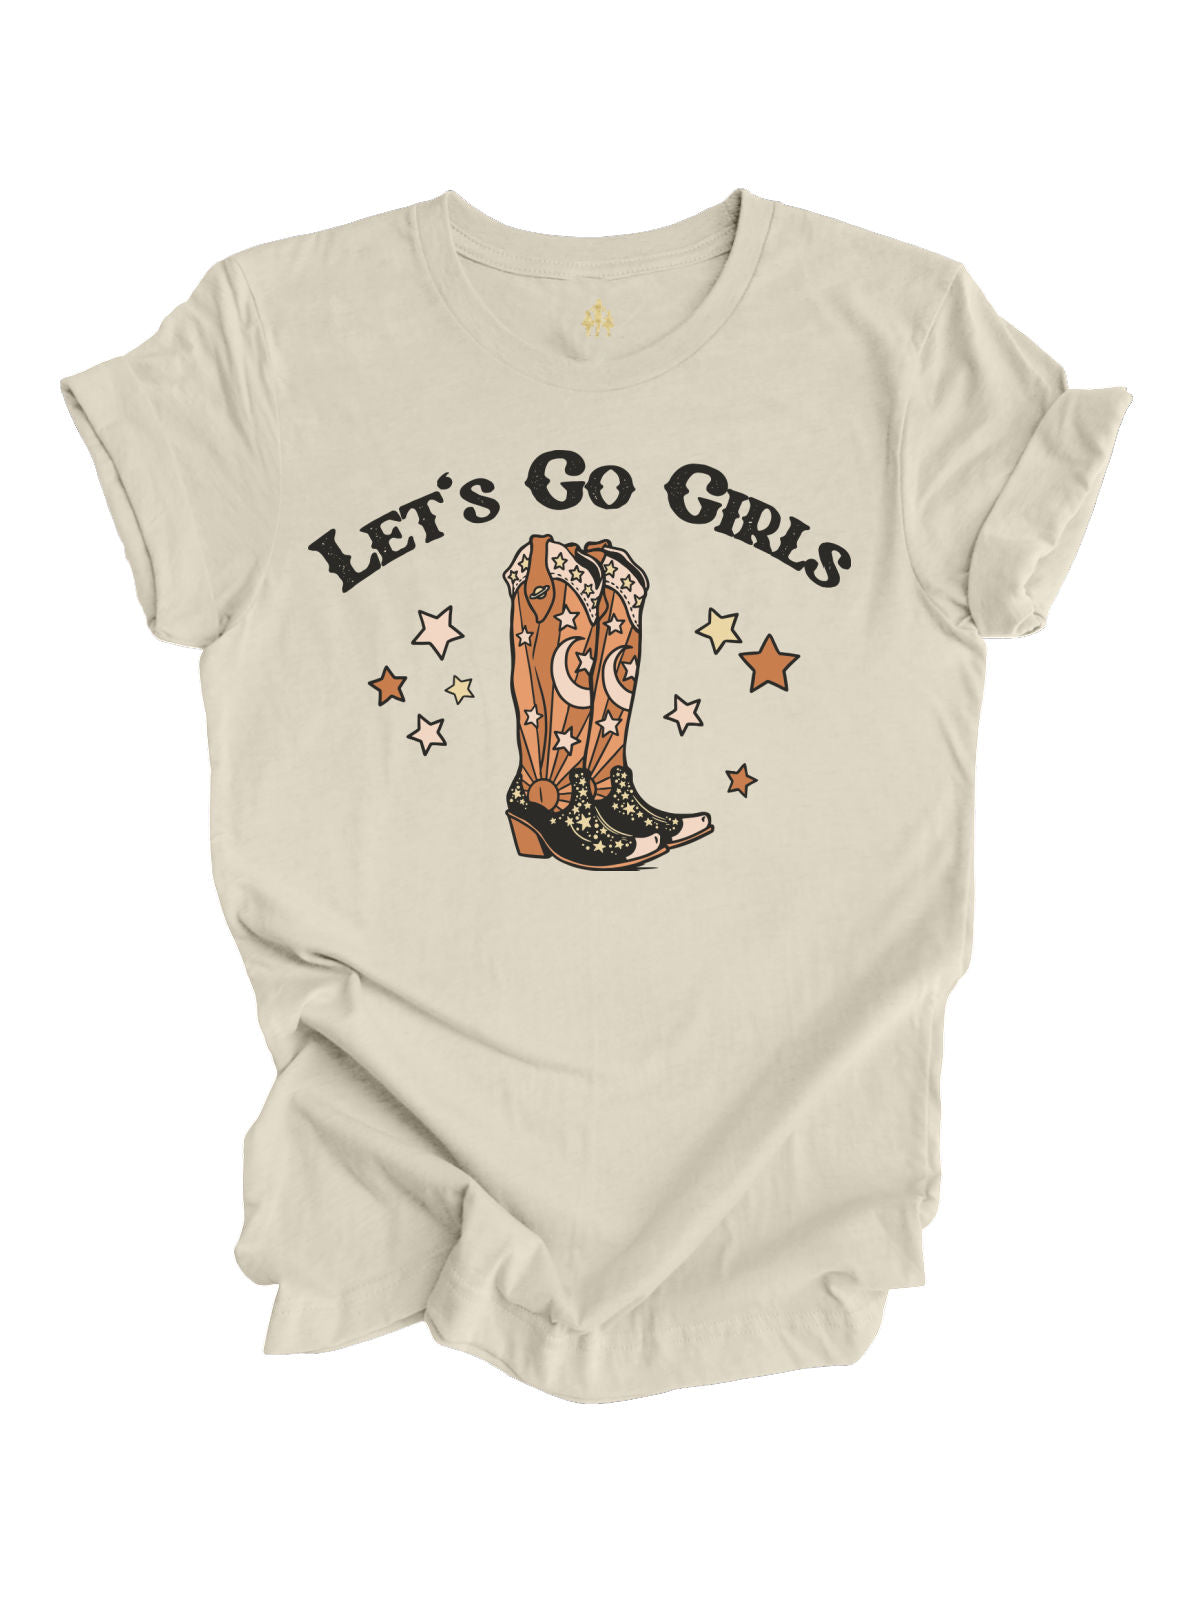 Let's Go Girls Cowboy Country Women's Shirt